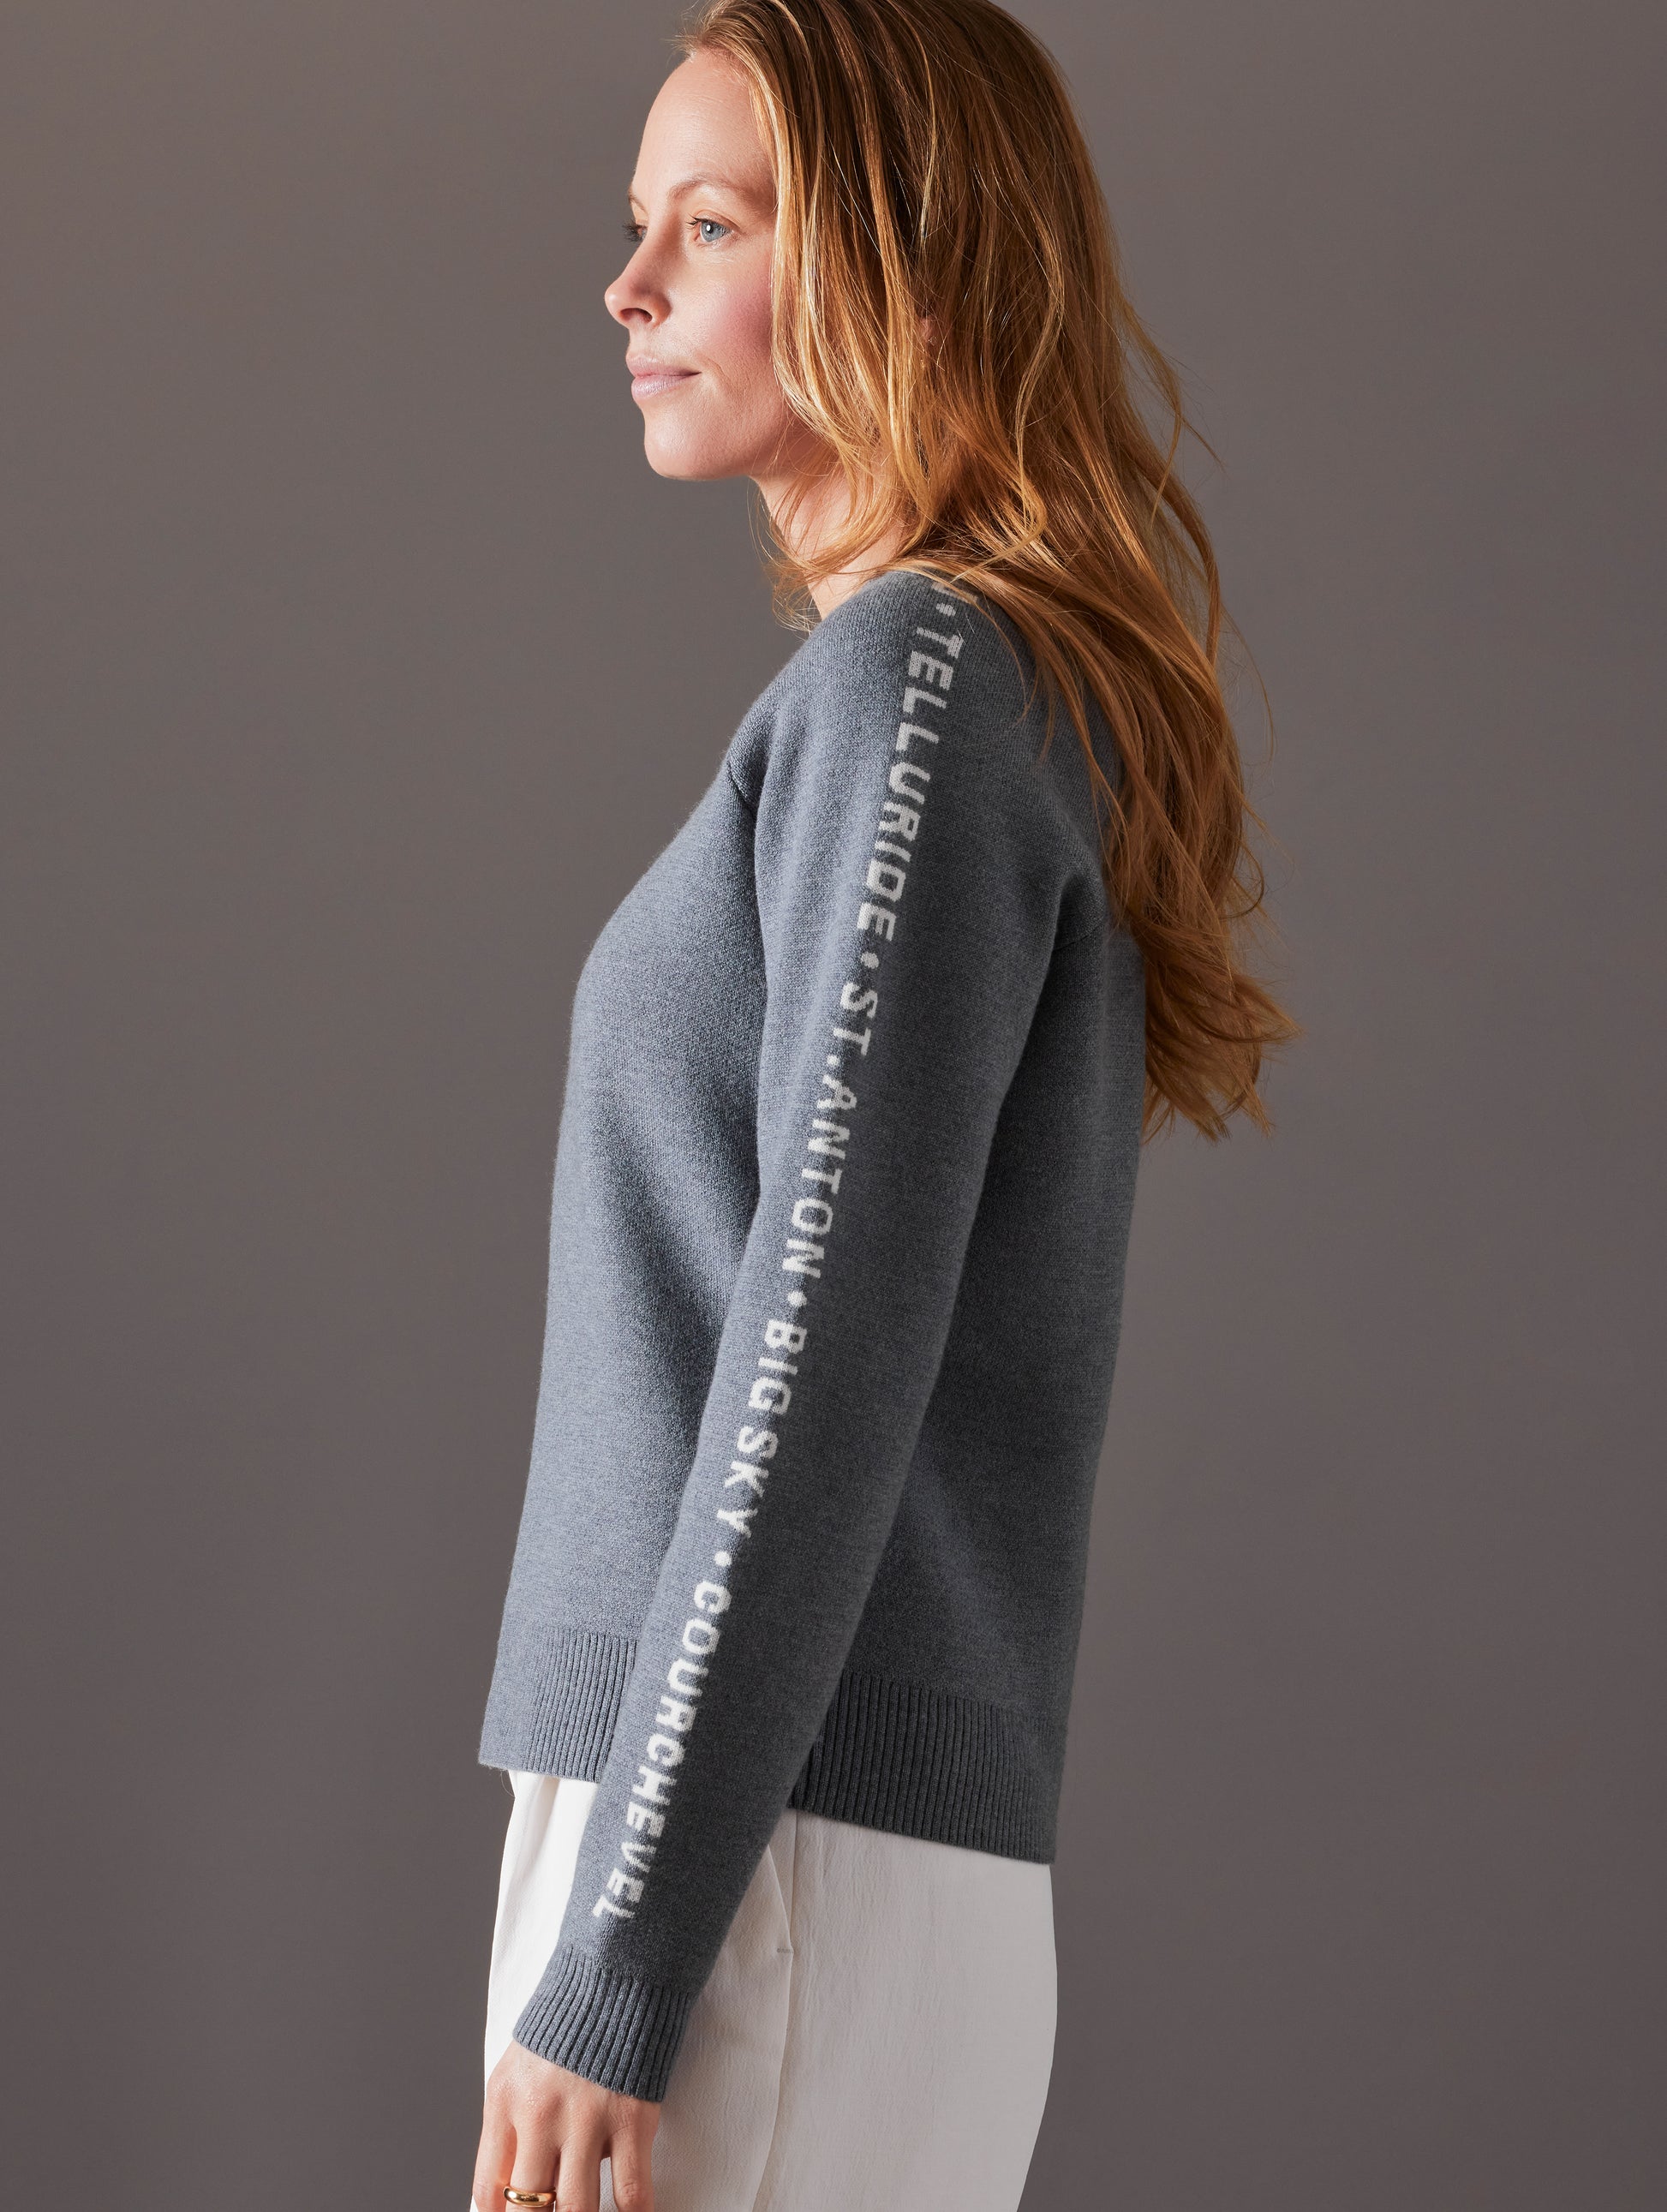 woman wearing grey sweater from AETHER Apparel